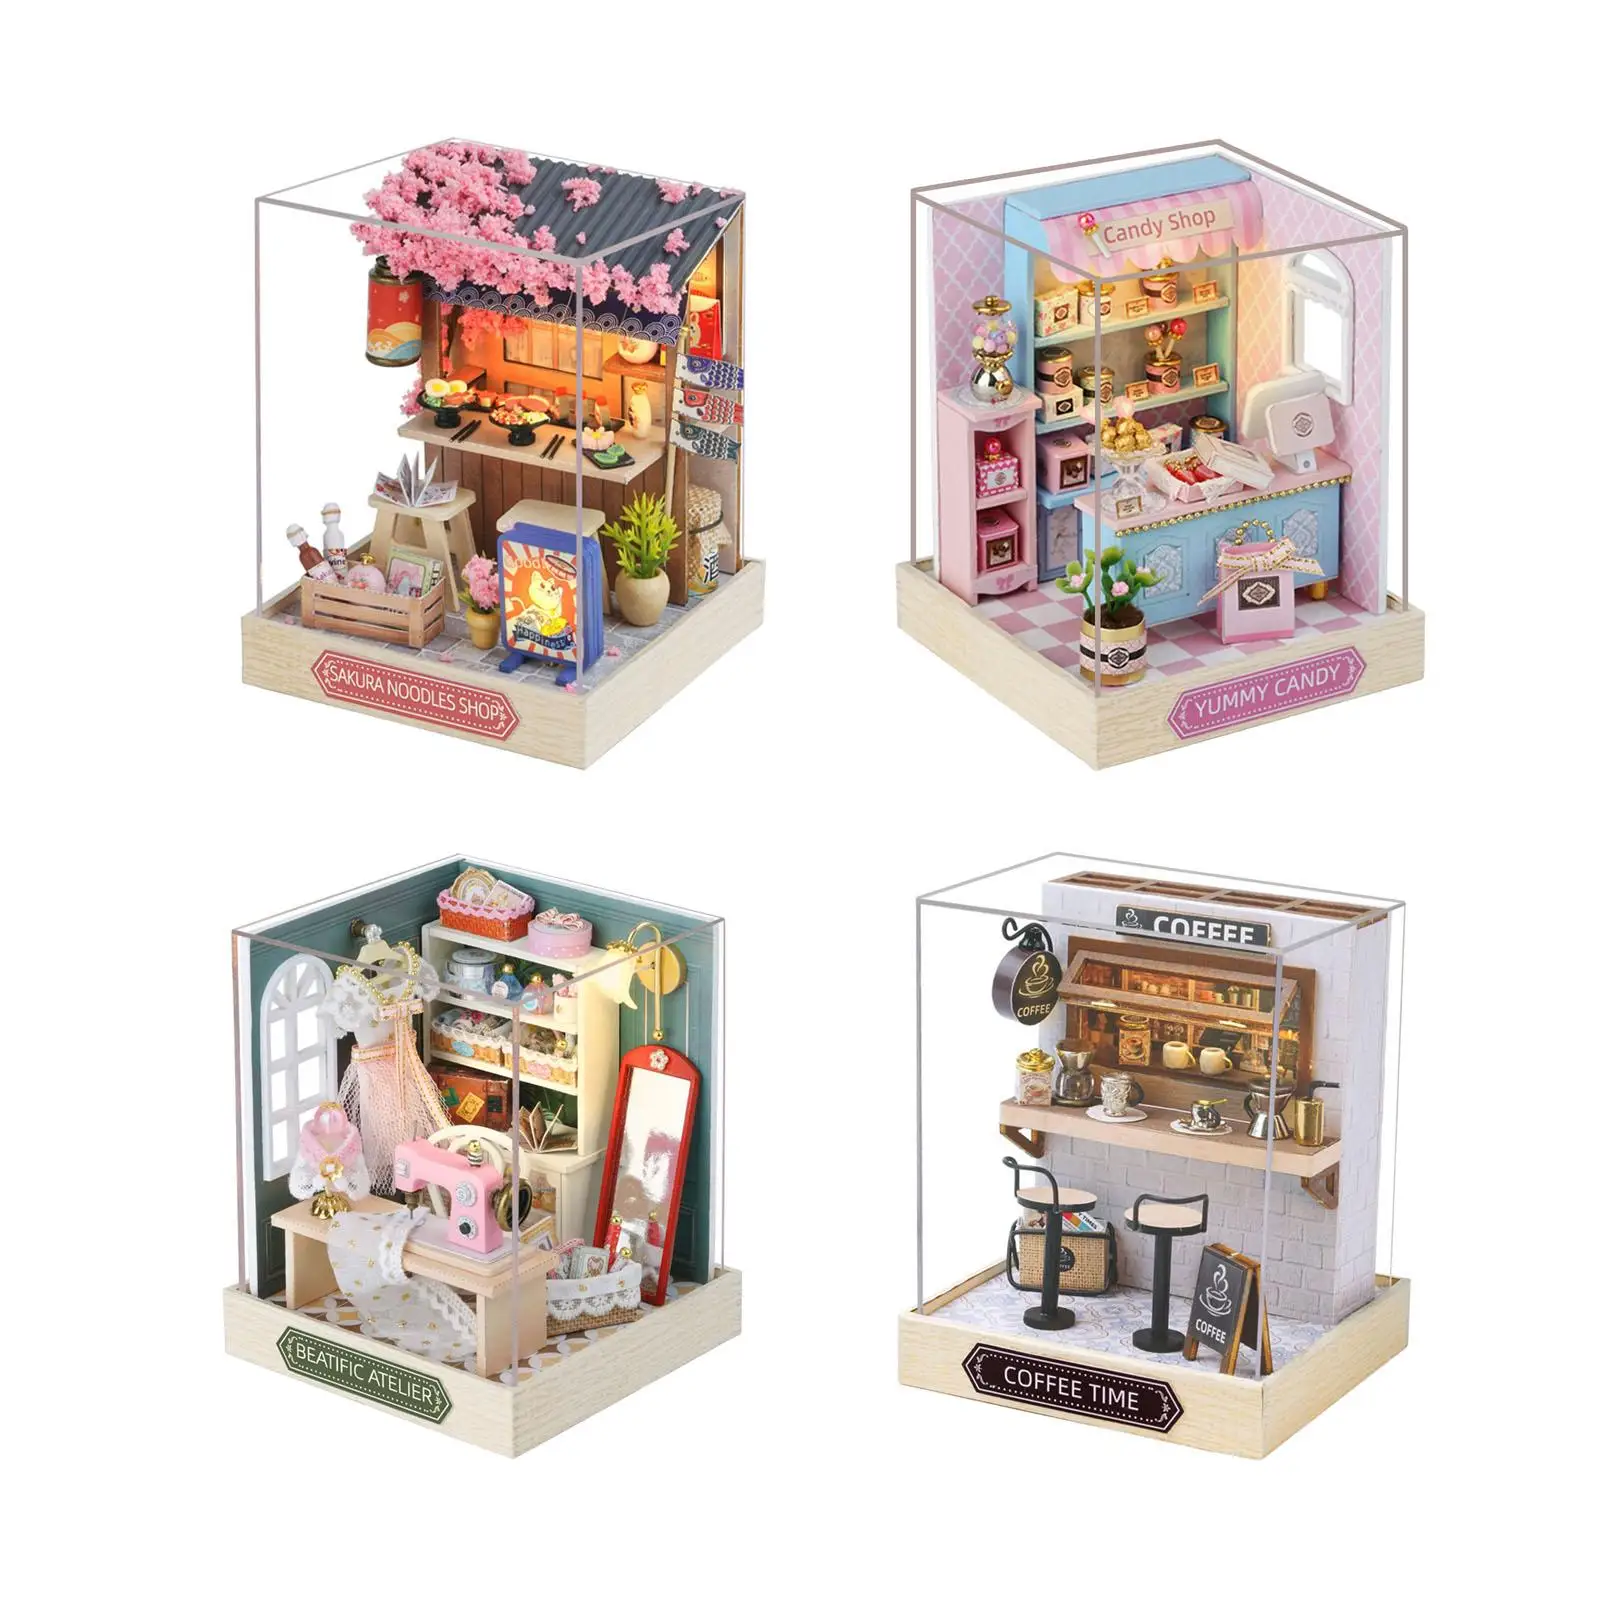 Miniature Dolls House Kits Home Decor Woodcrafts Toys Mini House Model Wood Doll House Model with Accessories for Kids Adults